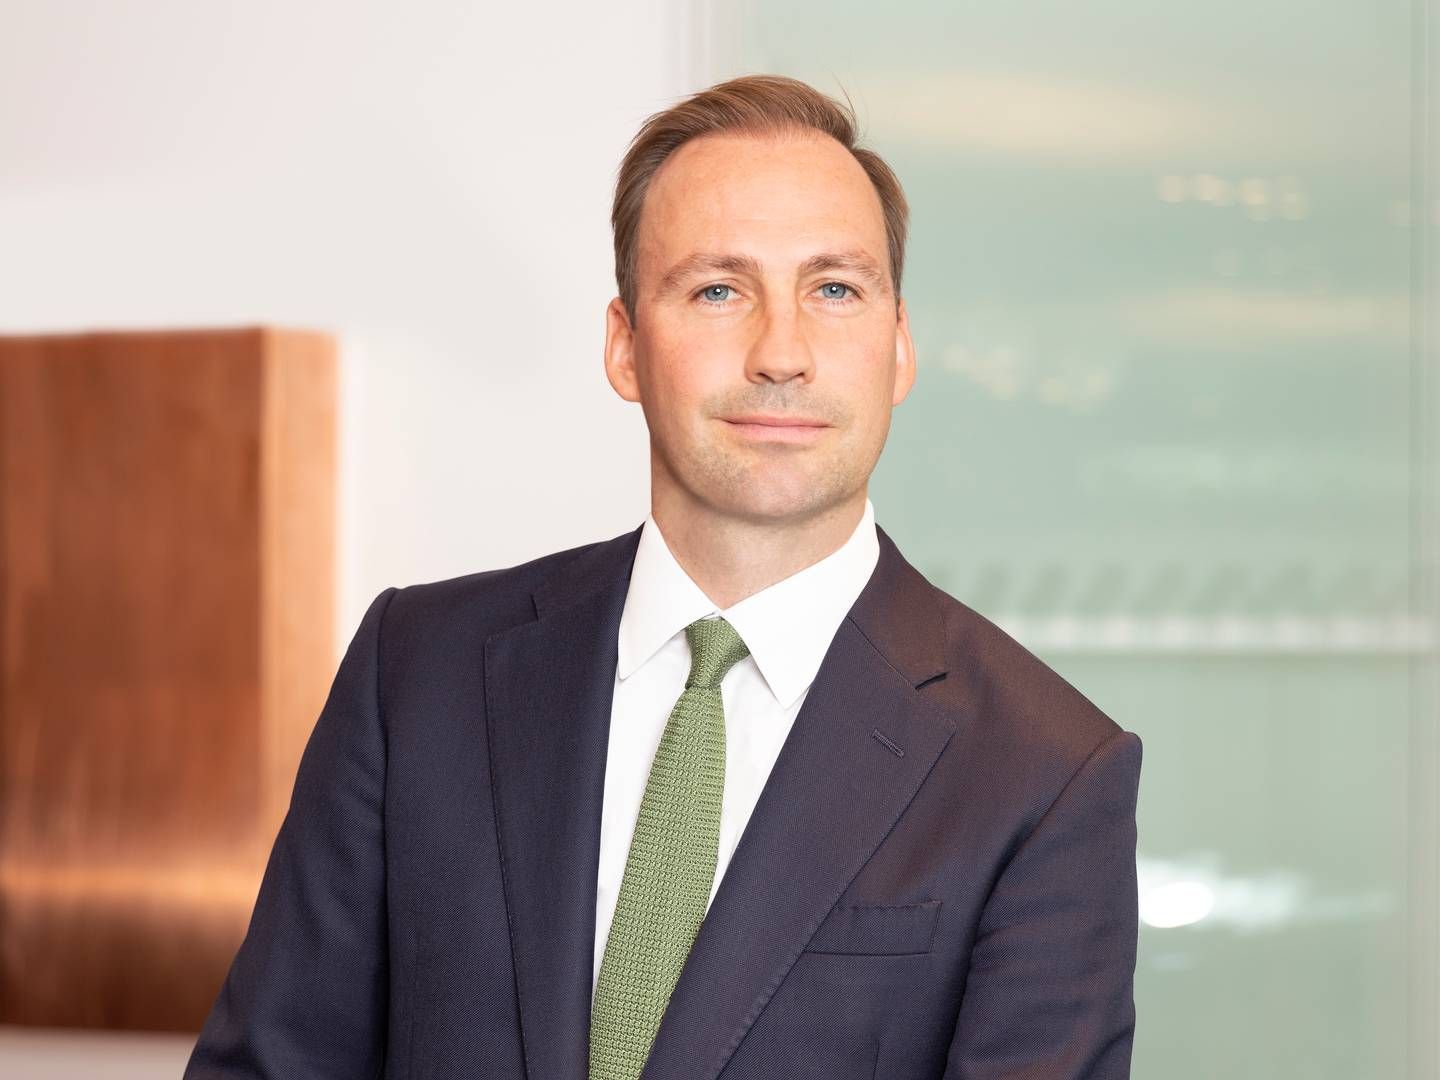 MPC Container Ships finds itself in a fragmented feeder market which could mean coming consolidations, says CEO Constantin Baack. | Photo: Pr / Mpc Container Ships